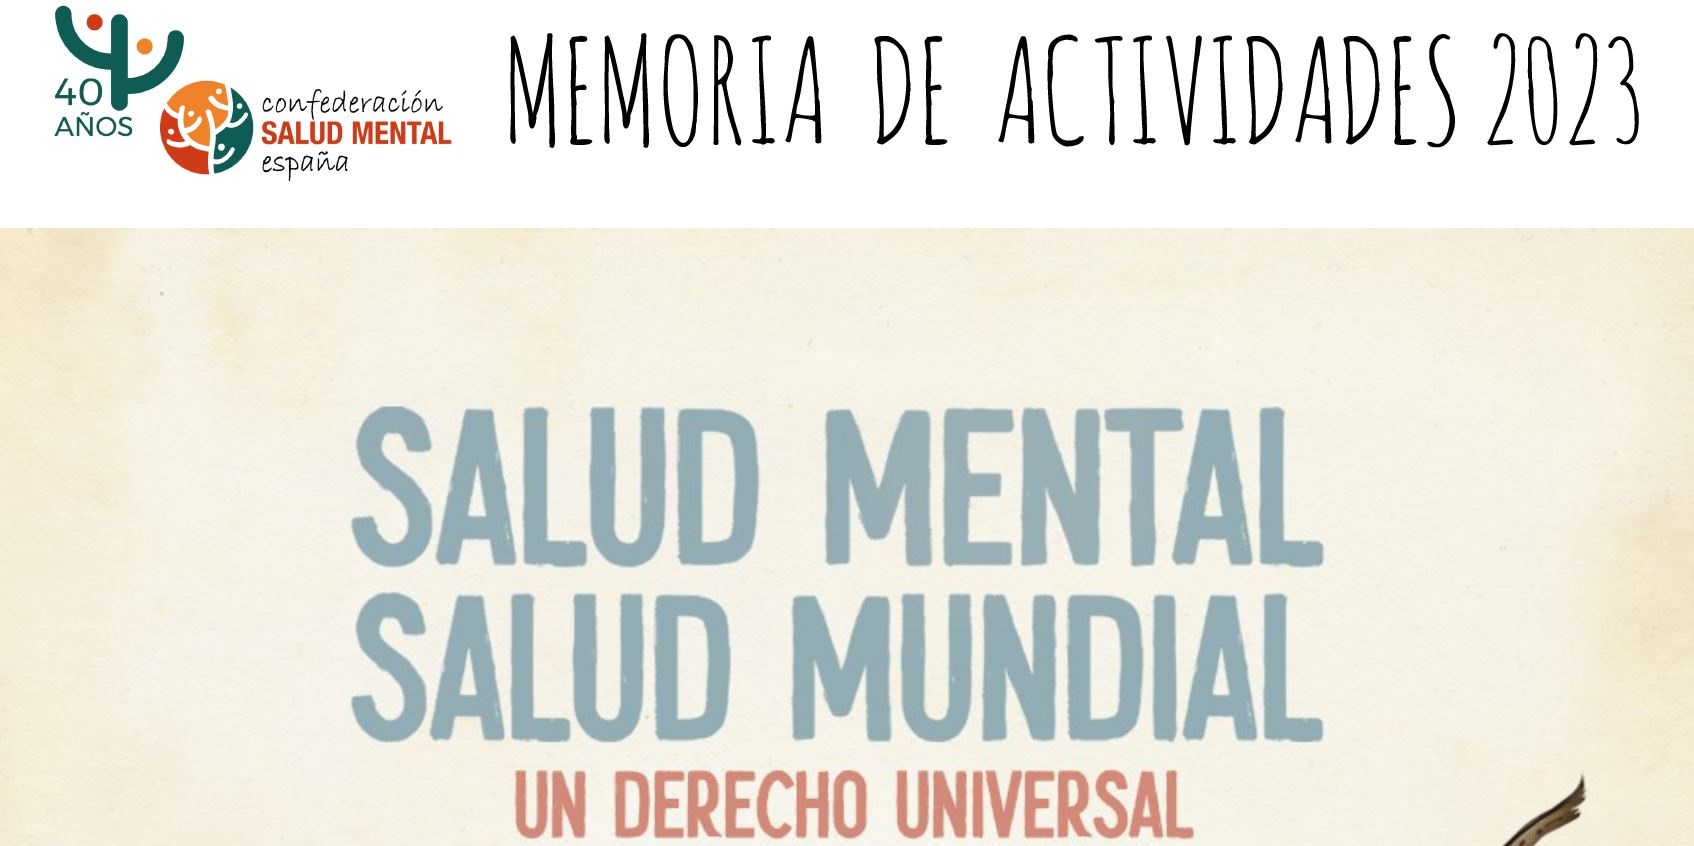 MENTAL HEALTH SPAIN publishes the 2023 Activities Report